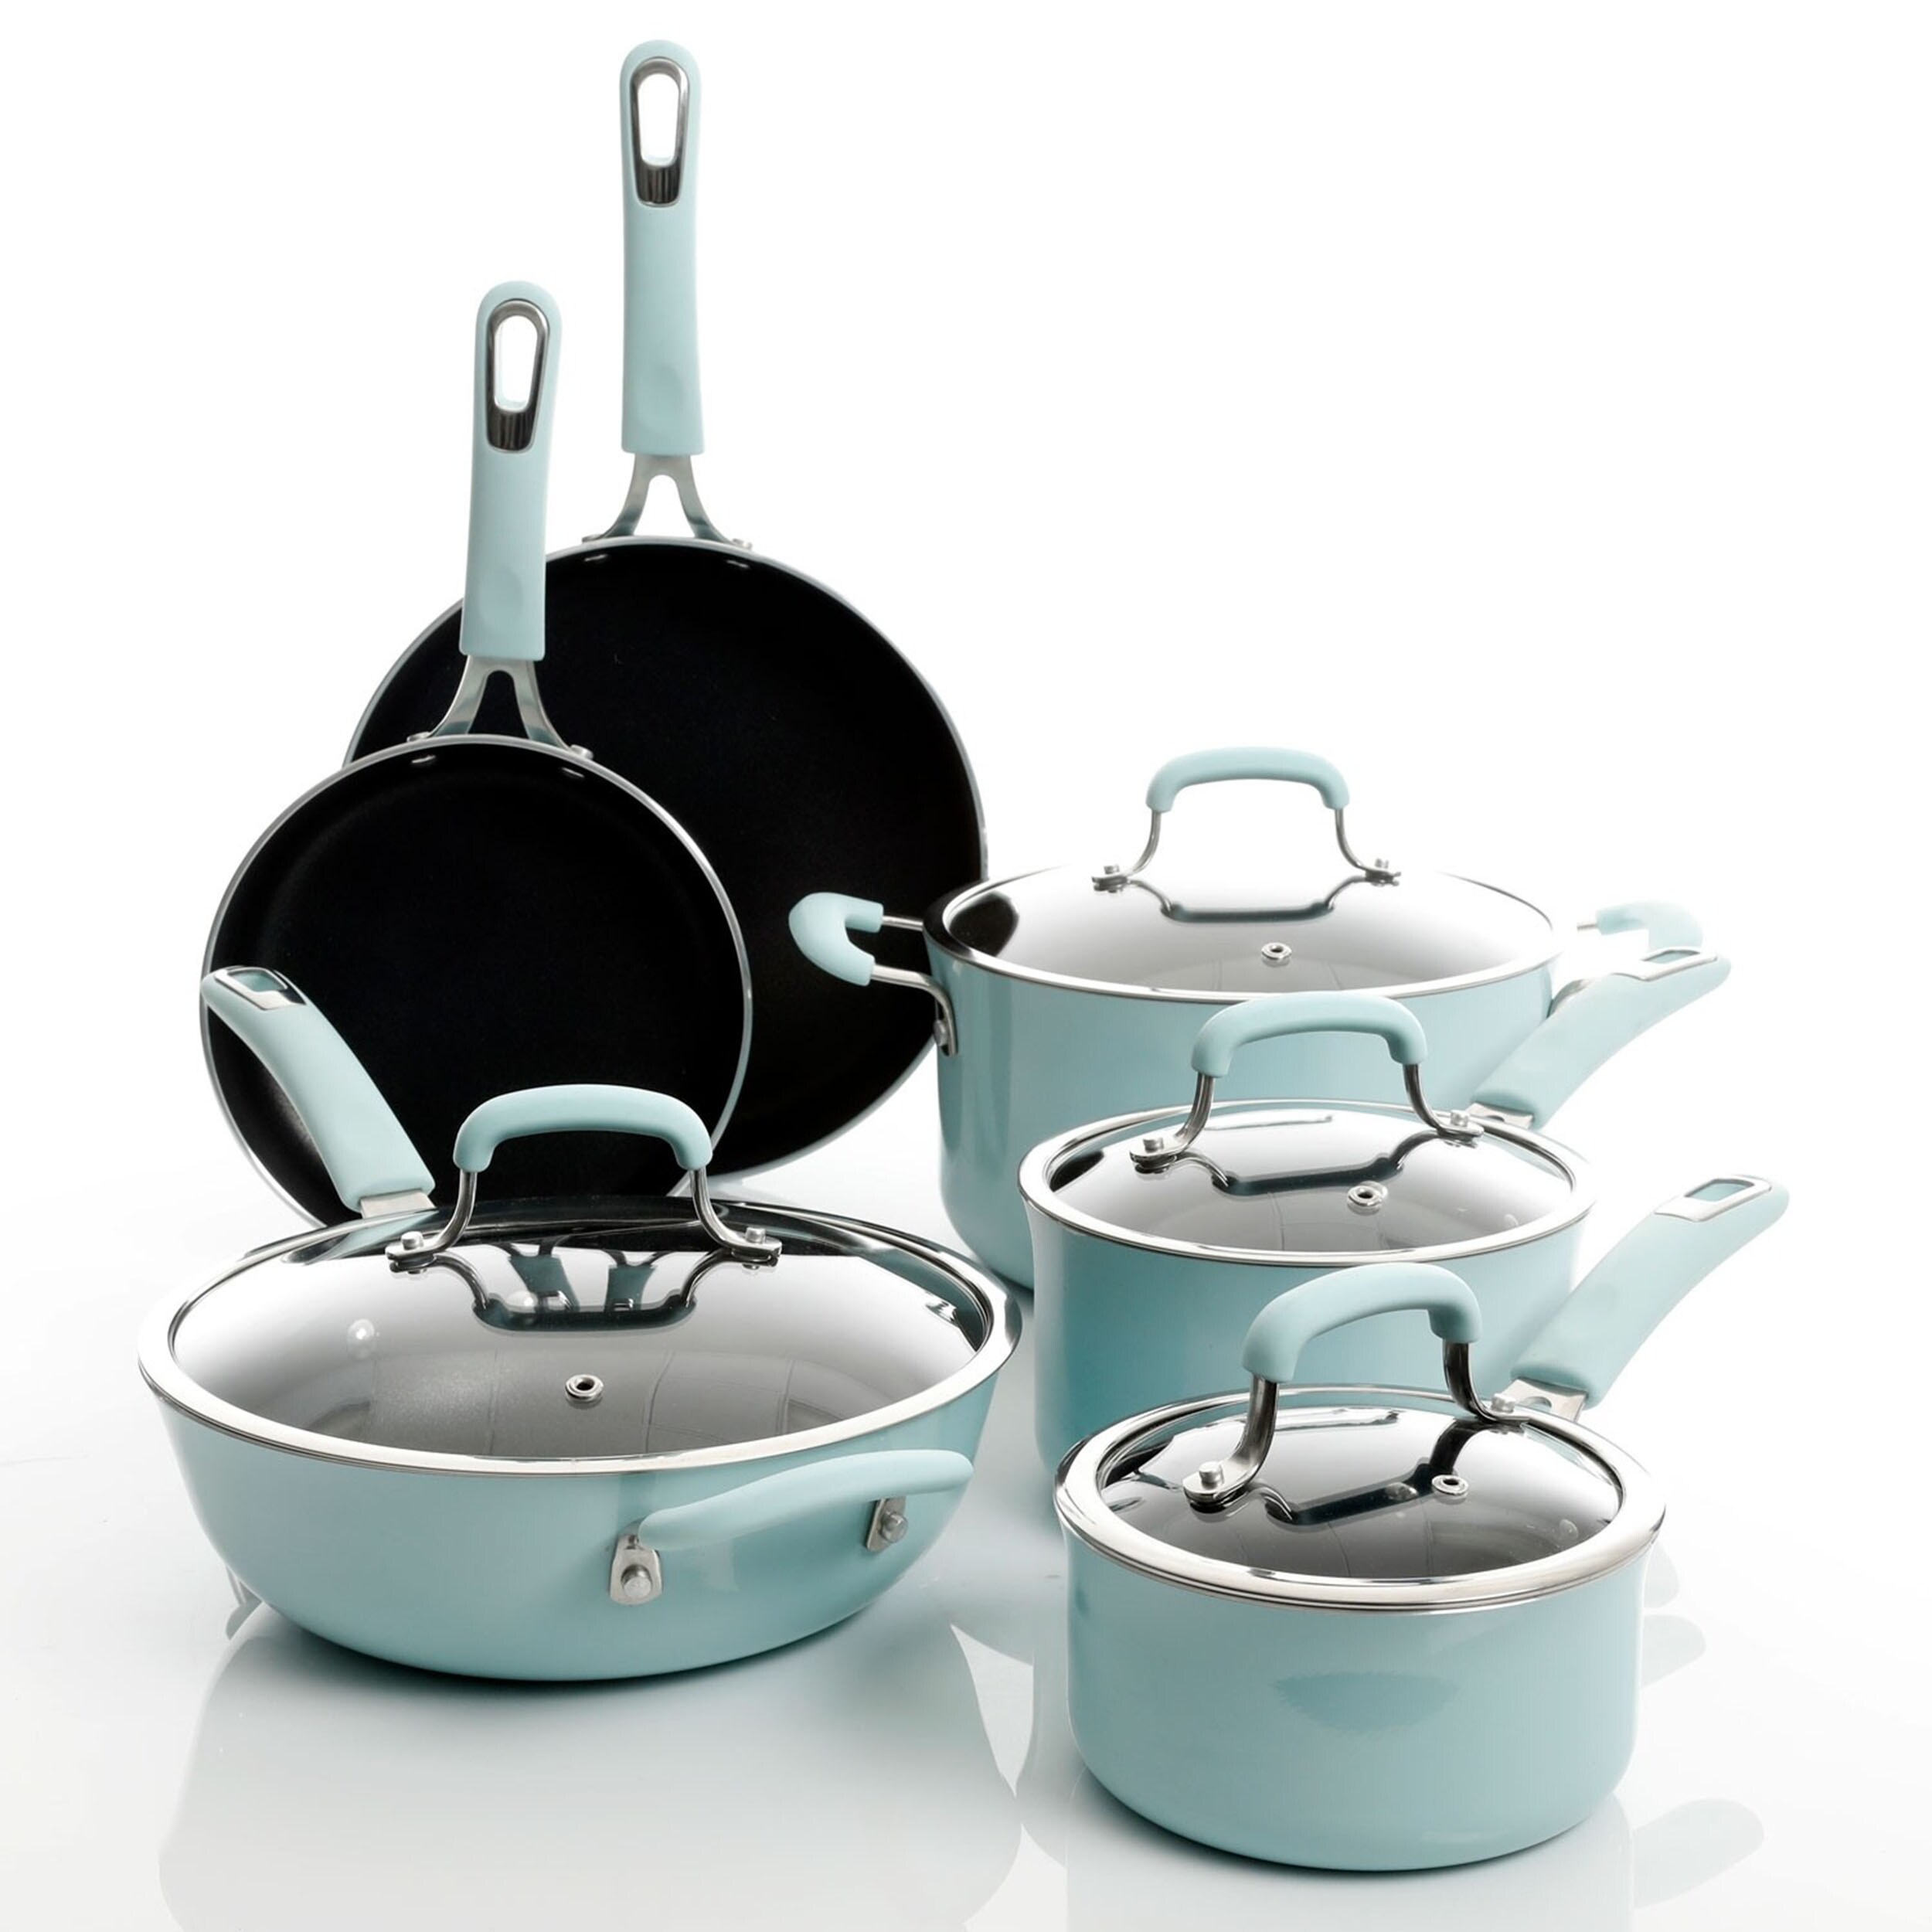 https://ak1.ostkcdn.com/images/products/is/images/direct/90f31dce68c7483de7f2358409ee9d907bf2f2f0/Nonstick-Aluminum-Cookware-10-Piece-Set-in-Arctic-Blue.jpg